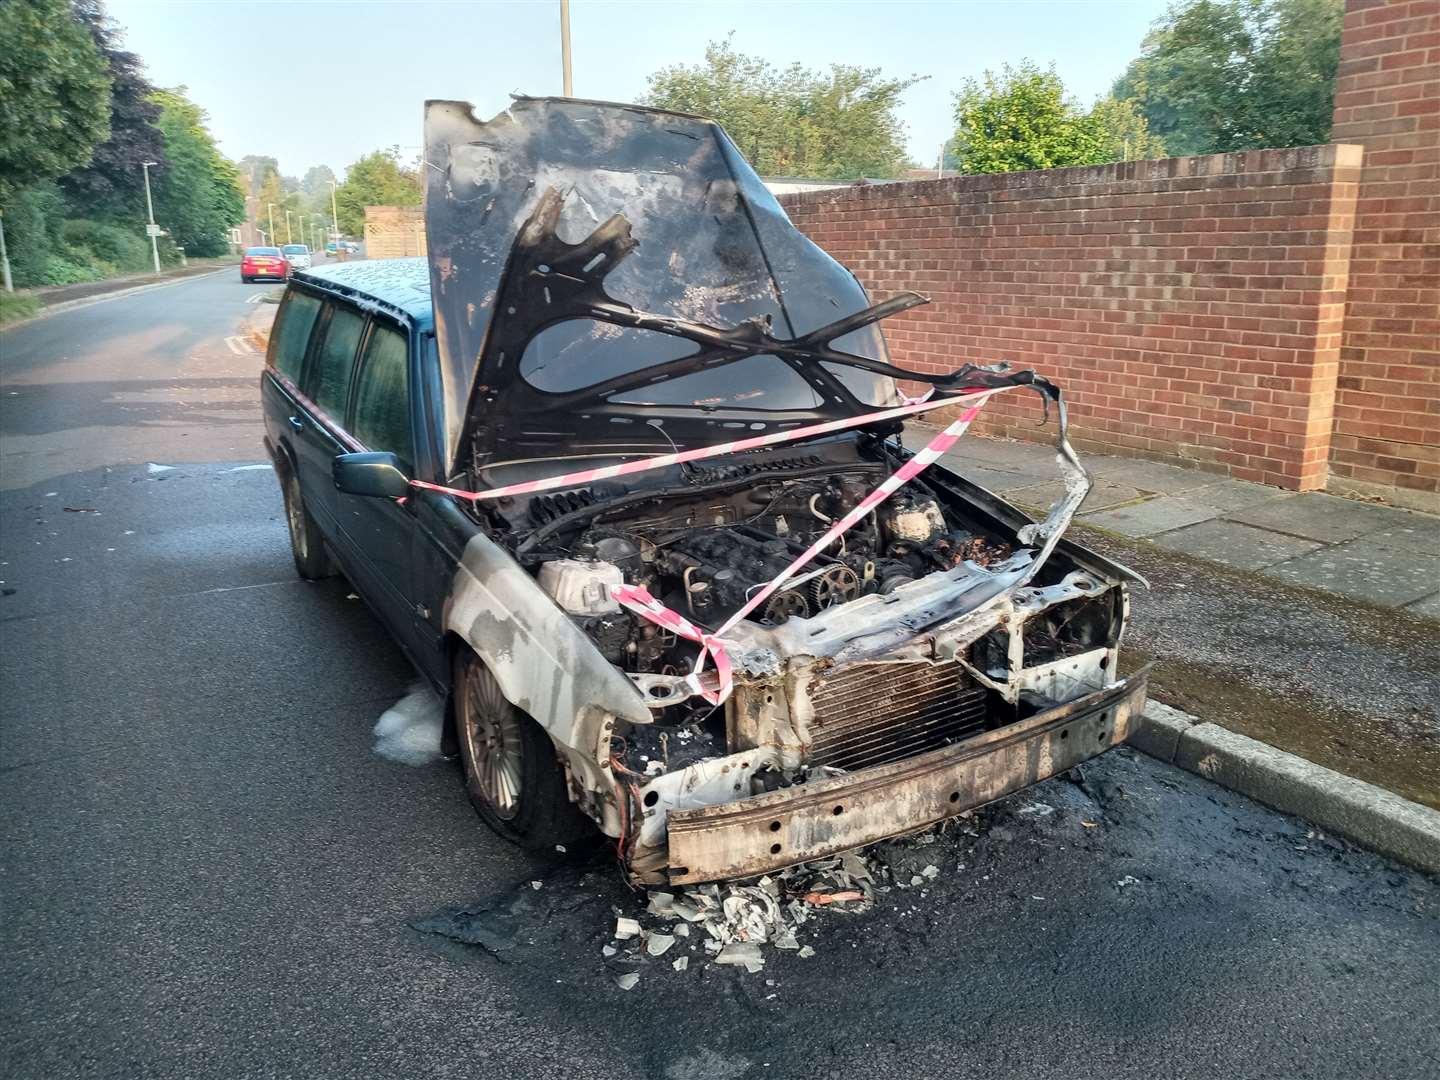 Another car destroyed by flames in Bishops Way, Canterbury